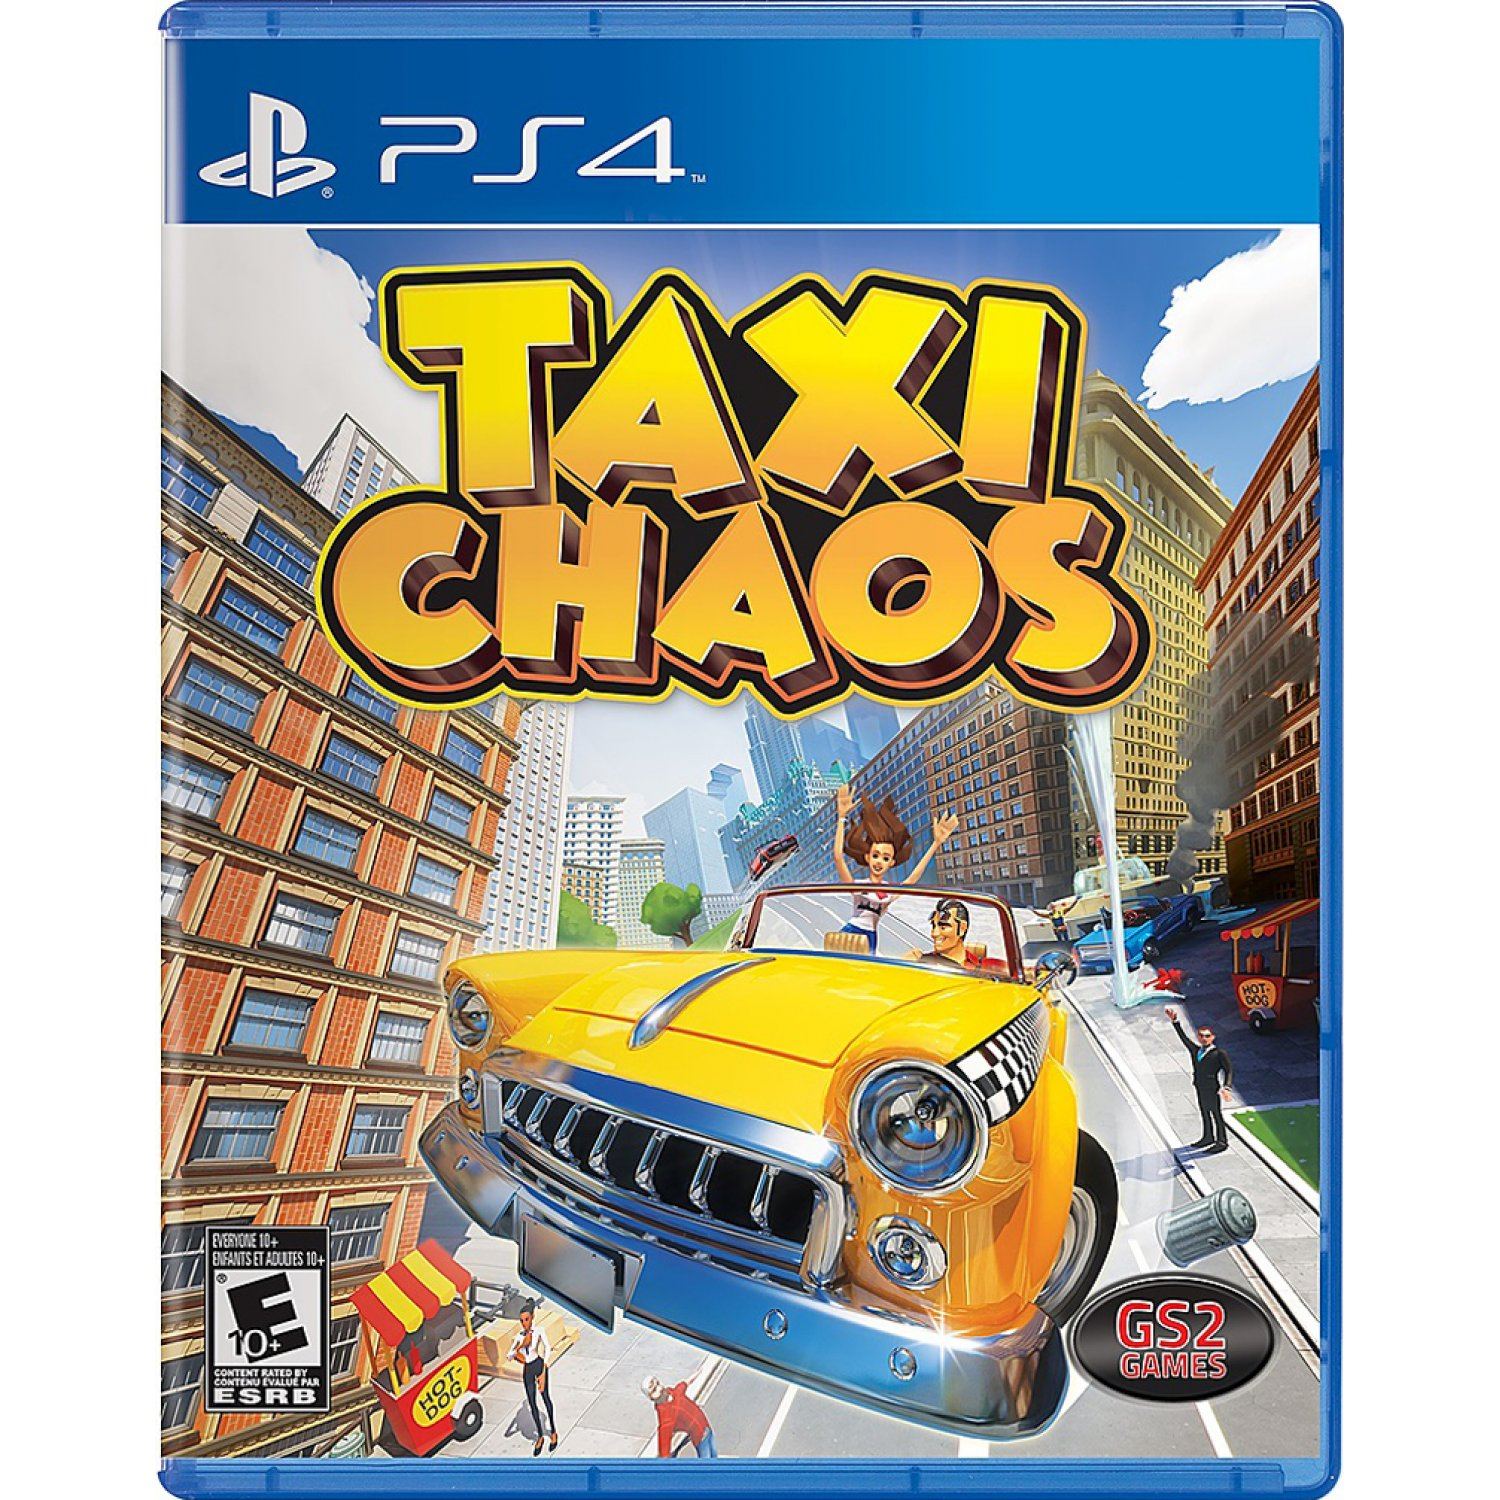 Taxi Chaos (Import)